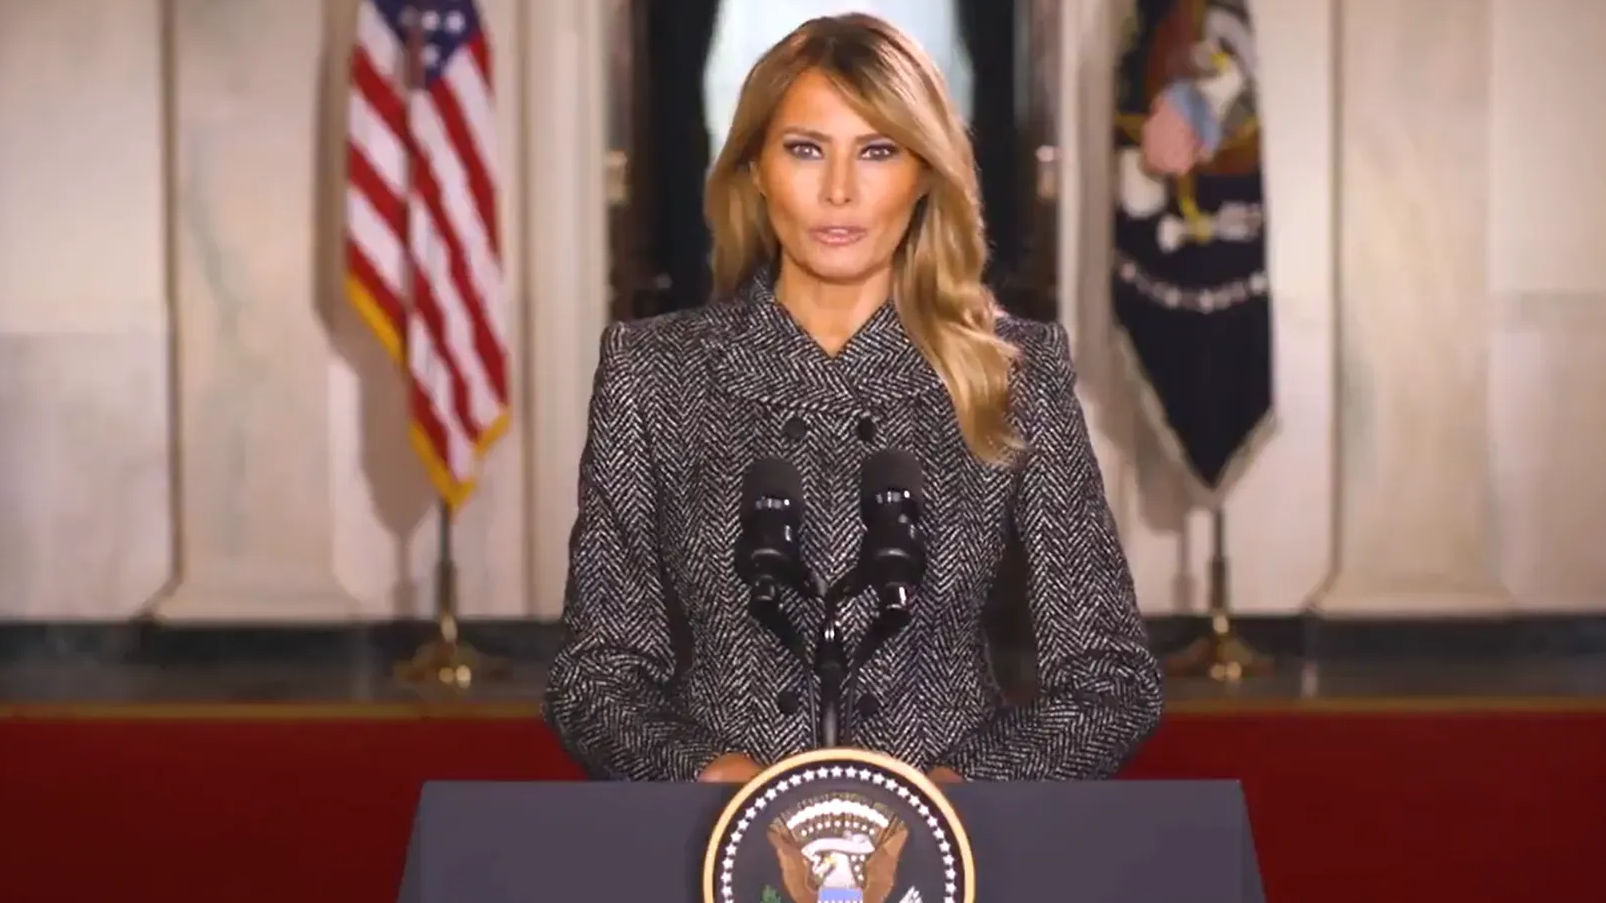 ‘Passion is everything… but violence is never the answer’: Melania Trump in her farewell speech